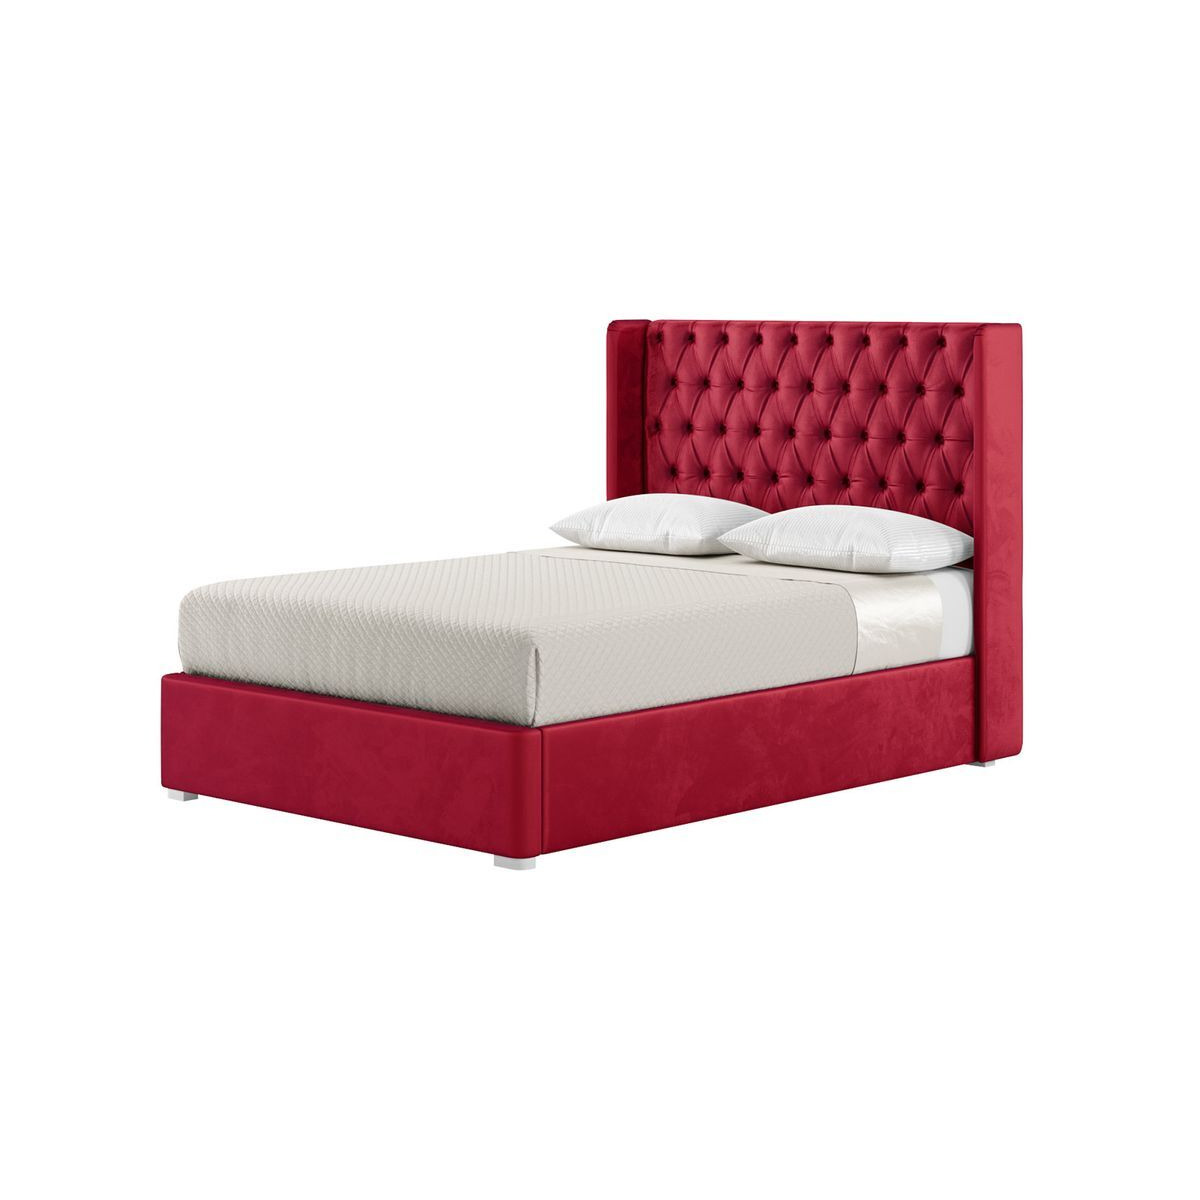 Jewel 4ft6 Double Bed Frame With Luxury Deep Button Quilted Wing Headboard, dark red, Leg colour: white - image 1